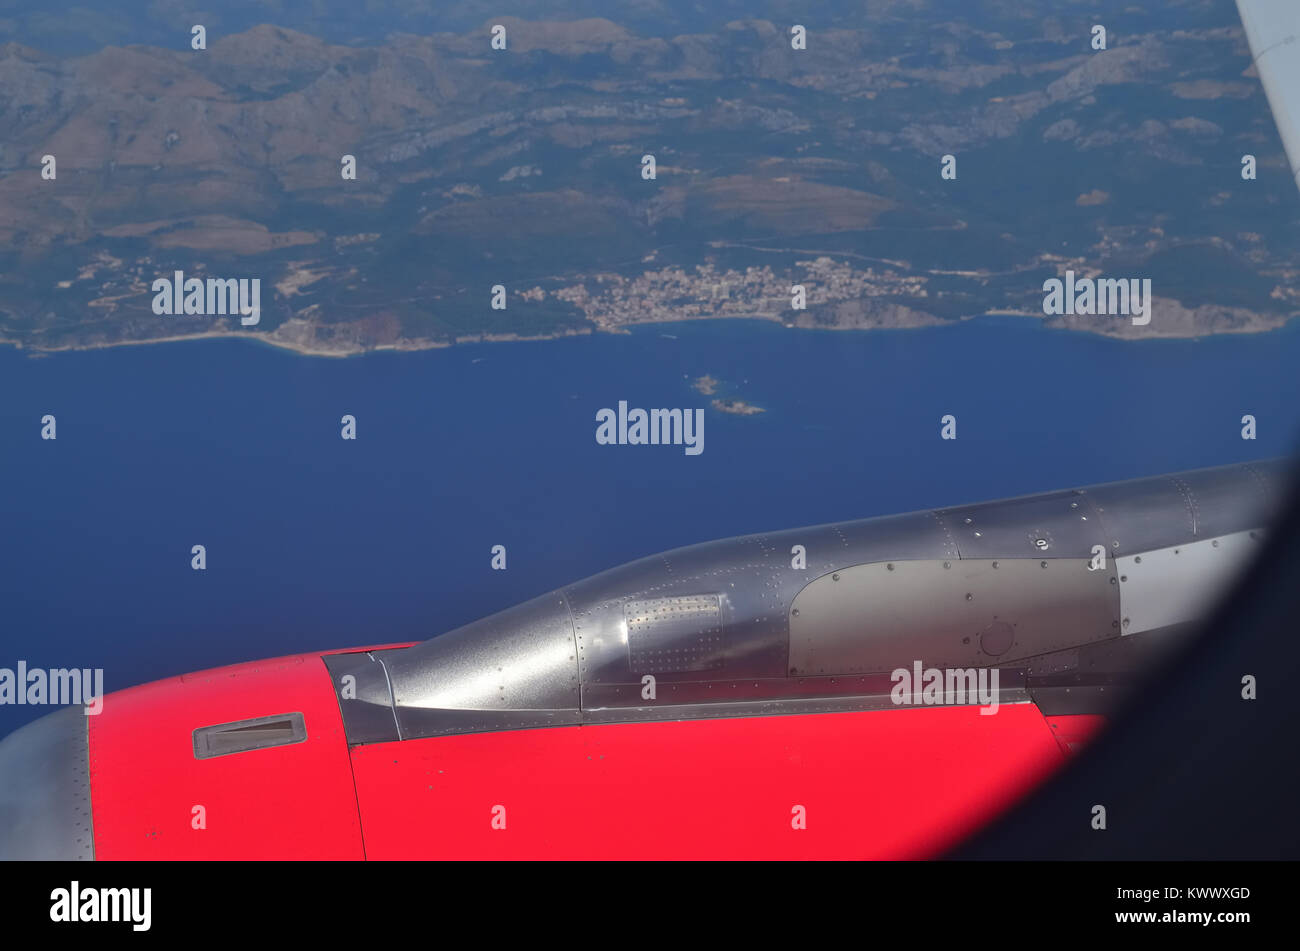 Aerial view from a plane to its red engine, the Adriatic sea, its coastline and a small coastal town Stock Photo